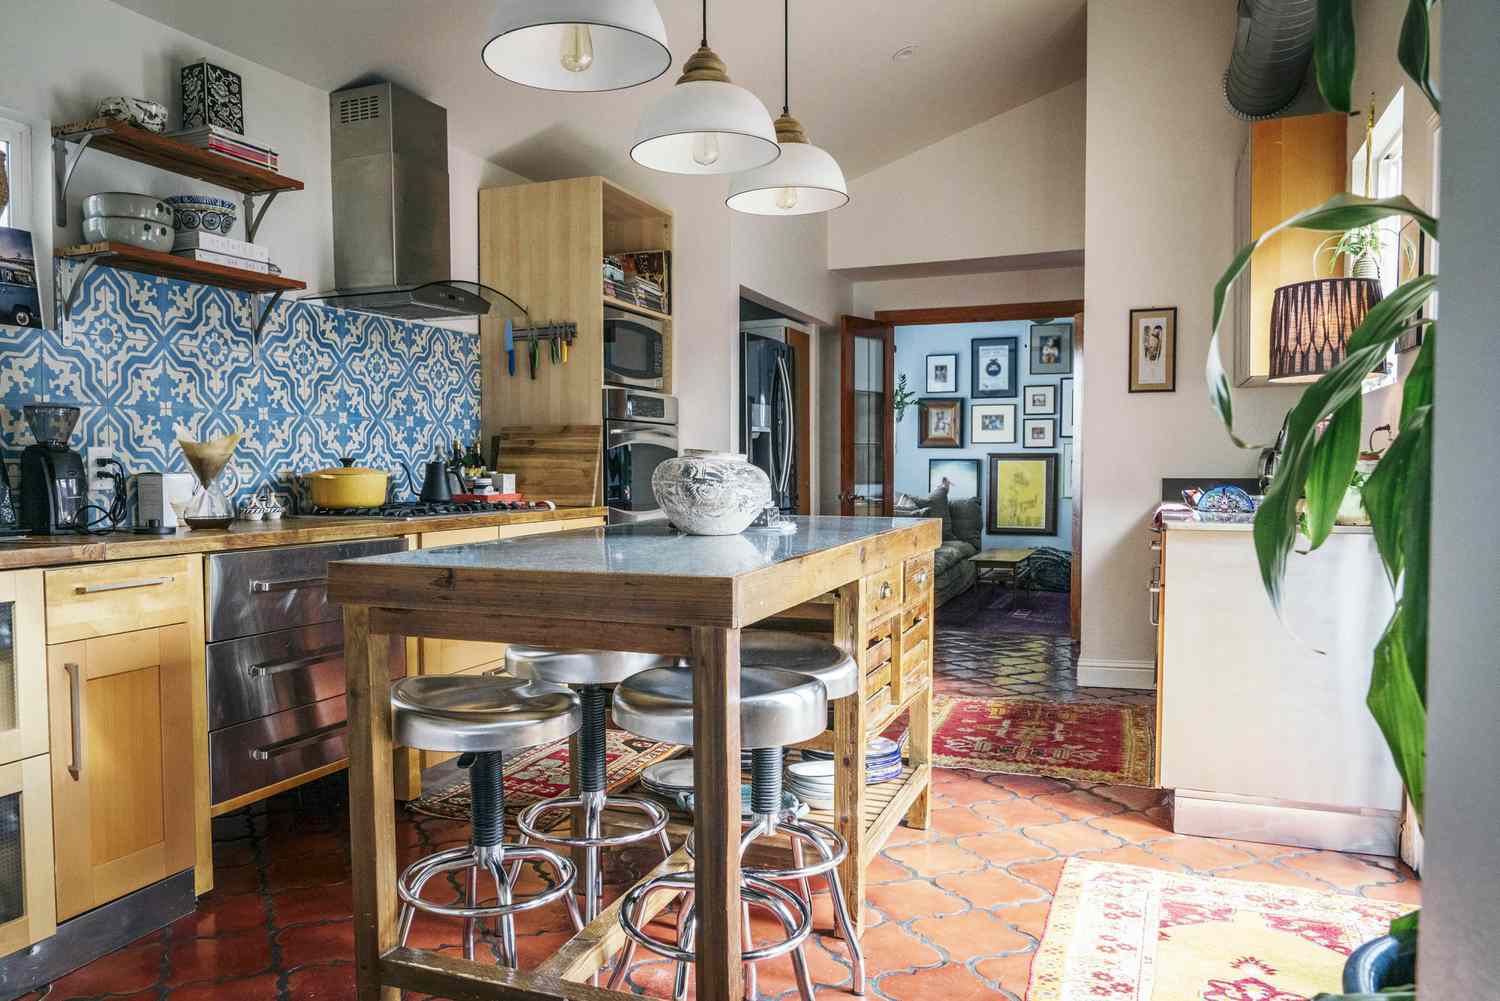 Interior of bohemian styled home kitchen